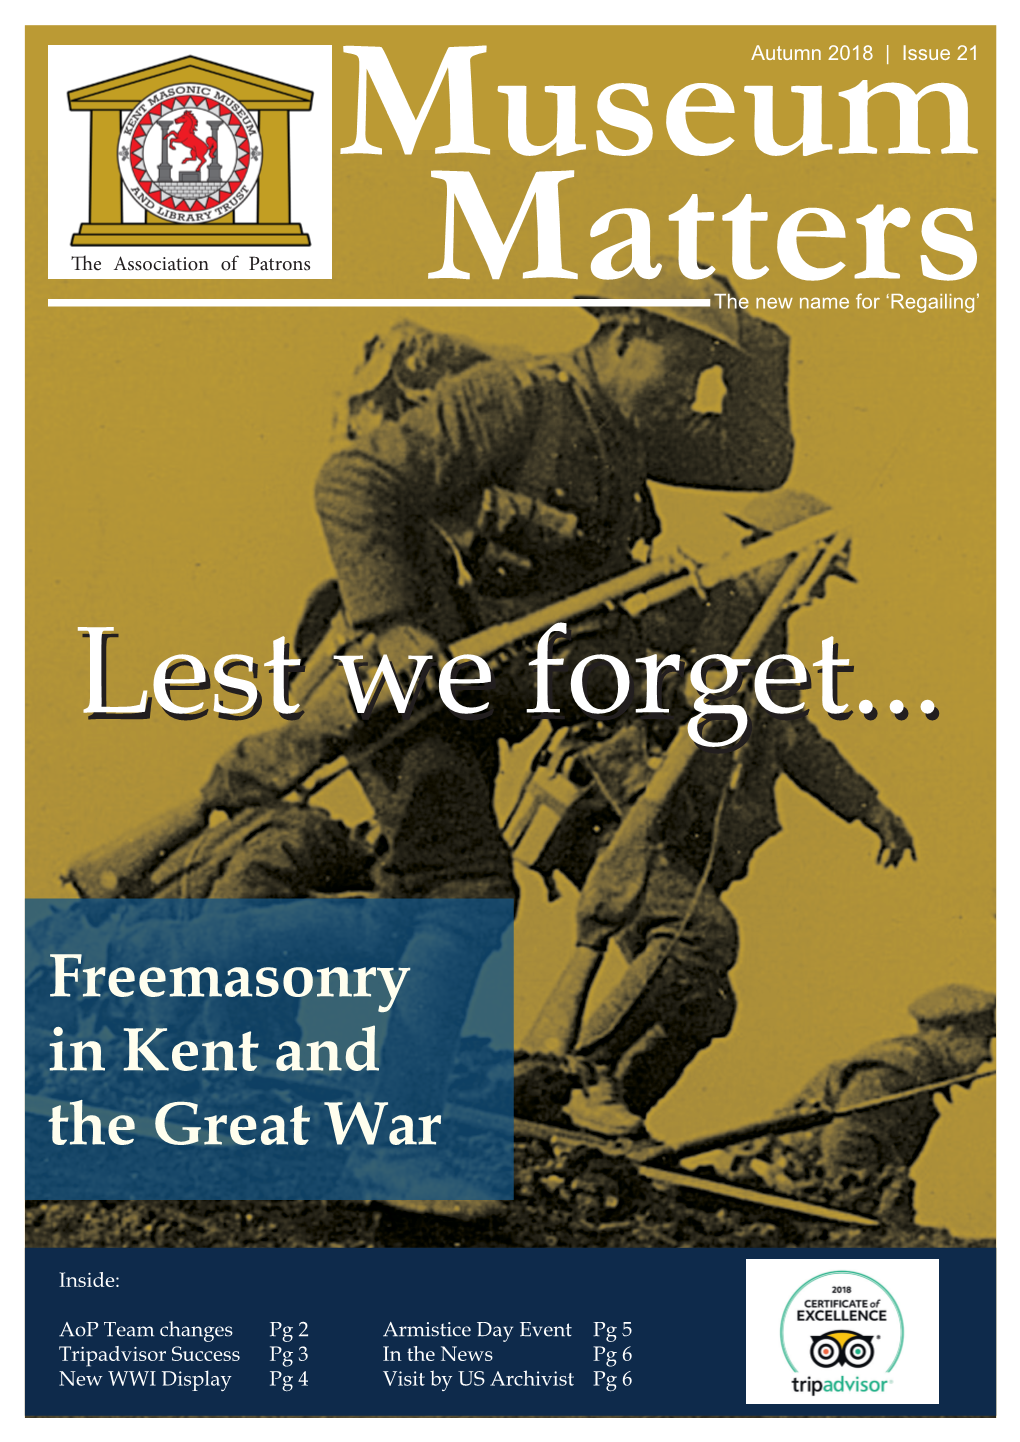 Freemasonry in Kent and the Great War